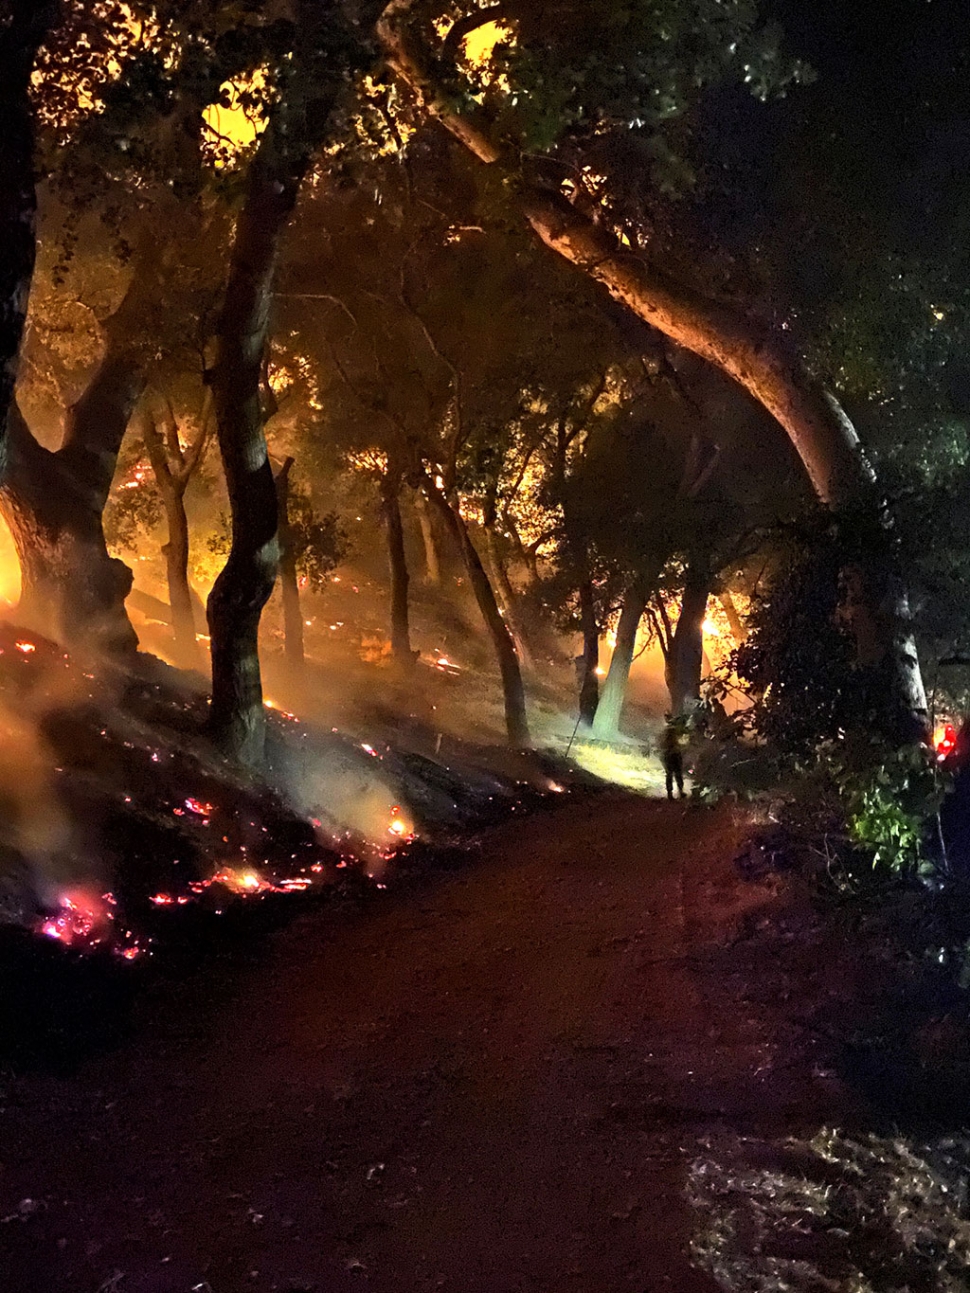 This photo was taken by a firefighter at the Hathaway Gate between Lake Piru and Hasley Canyon.